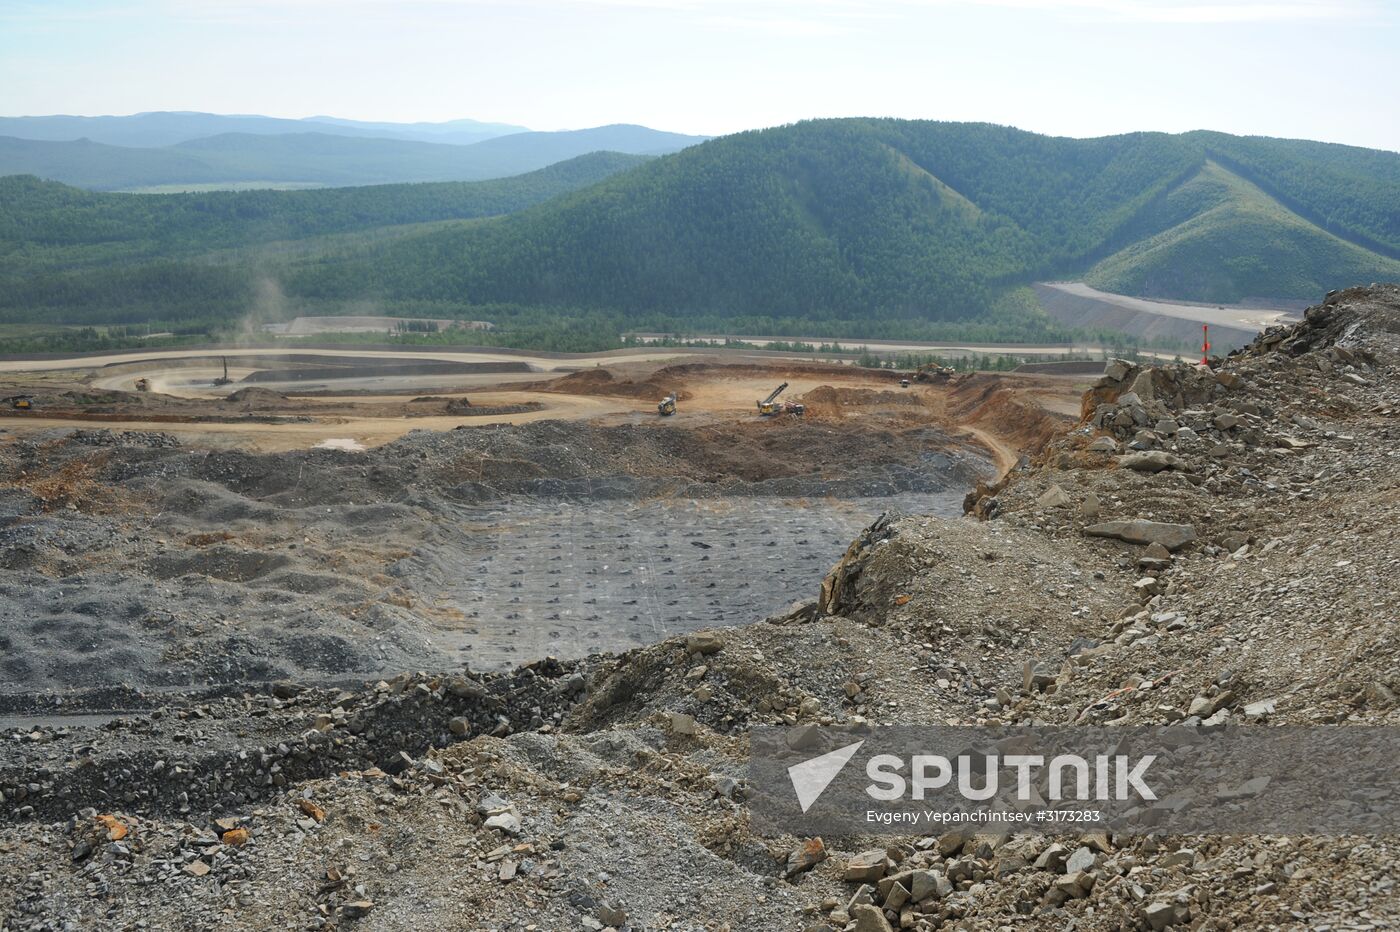 Bystrinsky Mining and Processing Plant in the Trans-Baikal Territory